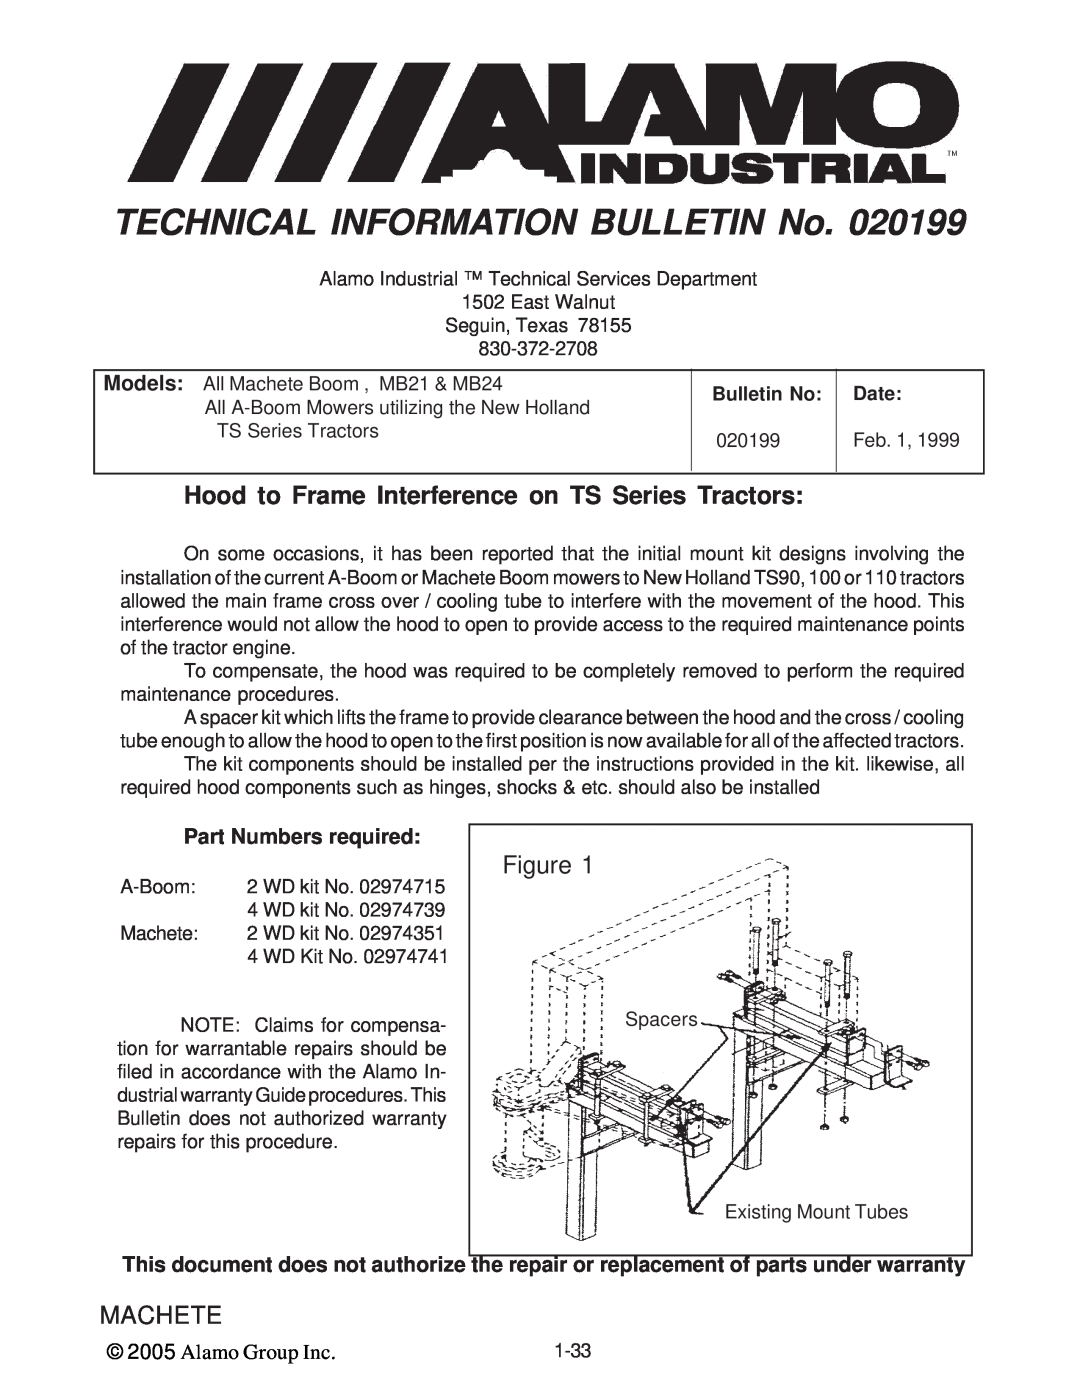 Alamo T 7740 Hood to Frame Interference on TS Series Tractors, Part Numbers required, TECHNICAL INFORMATION BULLETIN No 